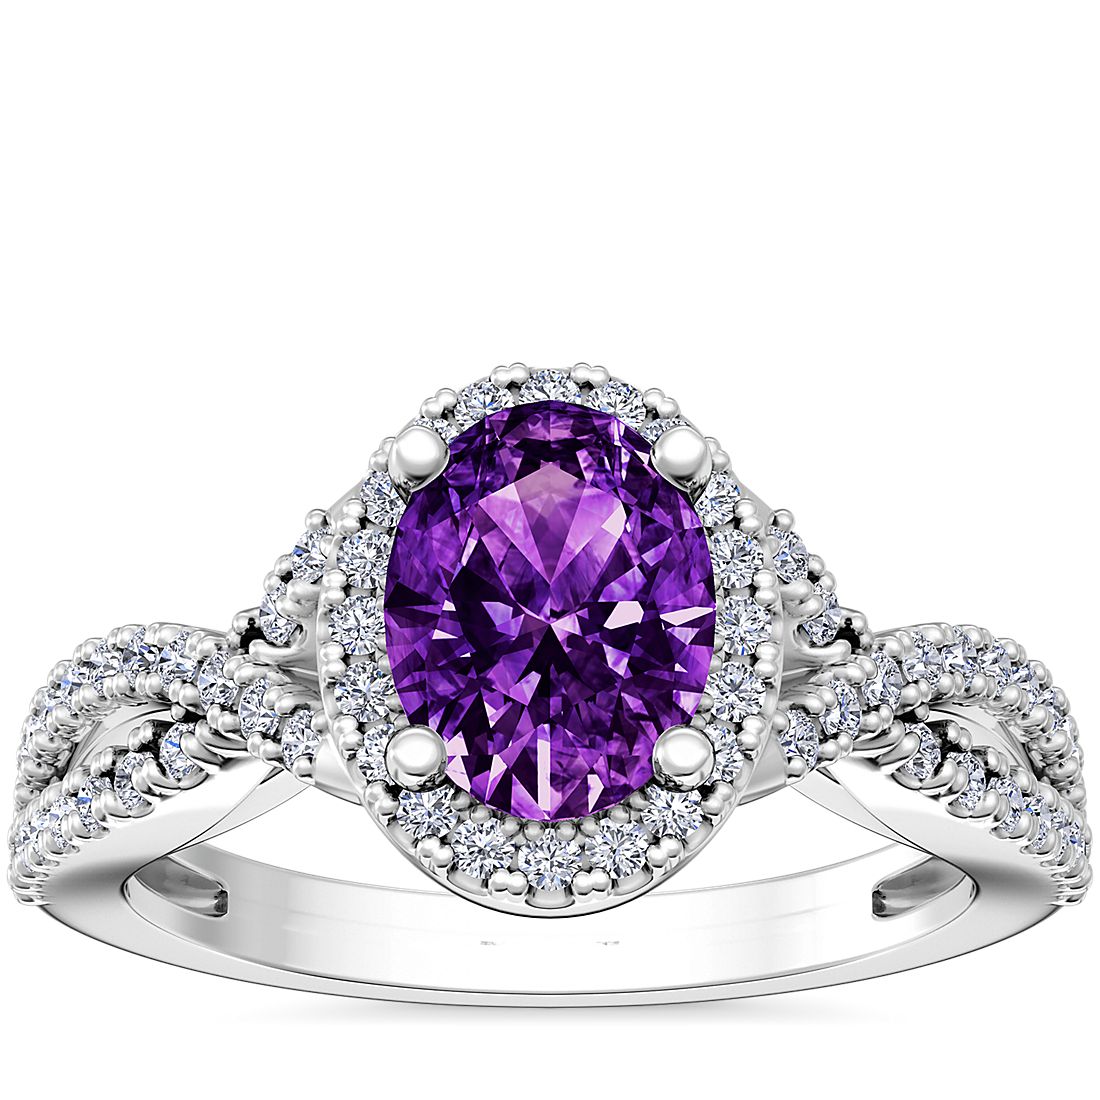 Twist Halo Diamond Engagement Ring with Oval Amethyst in 14k White Gold (8x6mm)